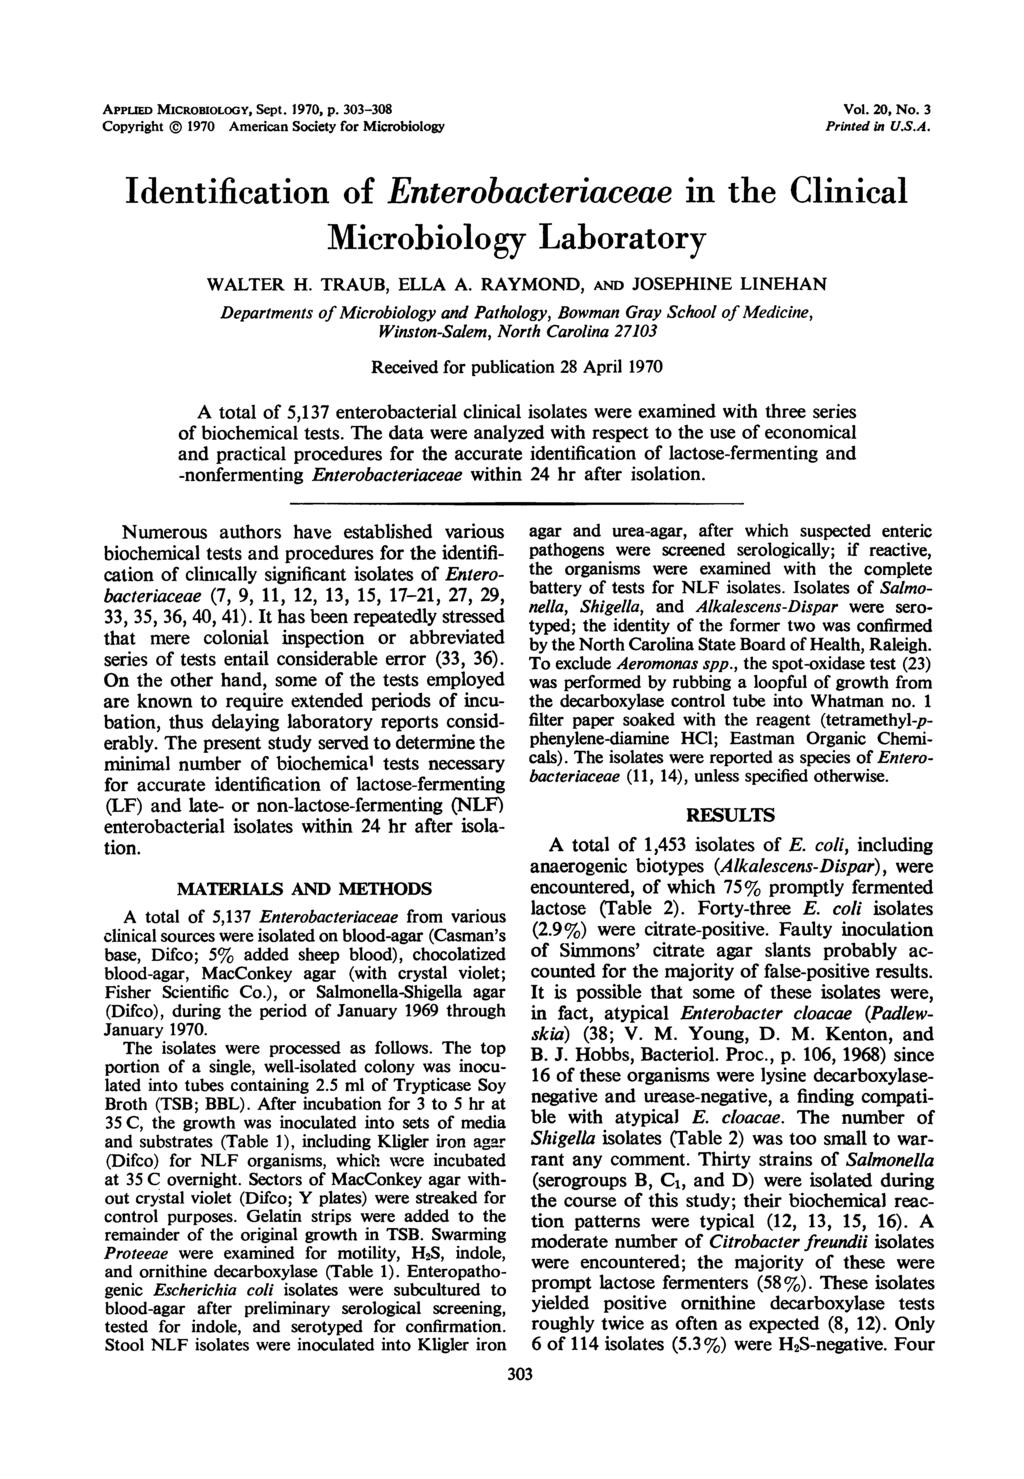 APPLED MICROBIOLOGY, Sept. 97, p. 33-38 Copyright ( 97 American Society for Microbiology Vol. 2, No. 3 Printed in U.S.A. Identification of Enterobacteriaceae in the Clinical Microbiology Laboratory WALTER H.